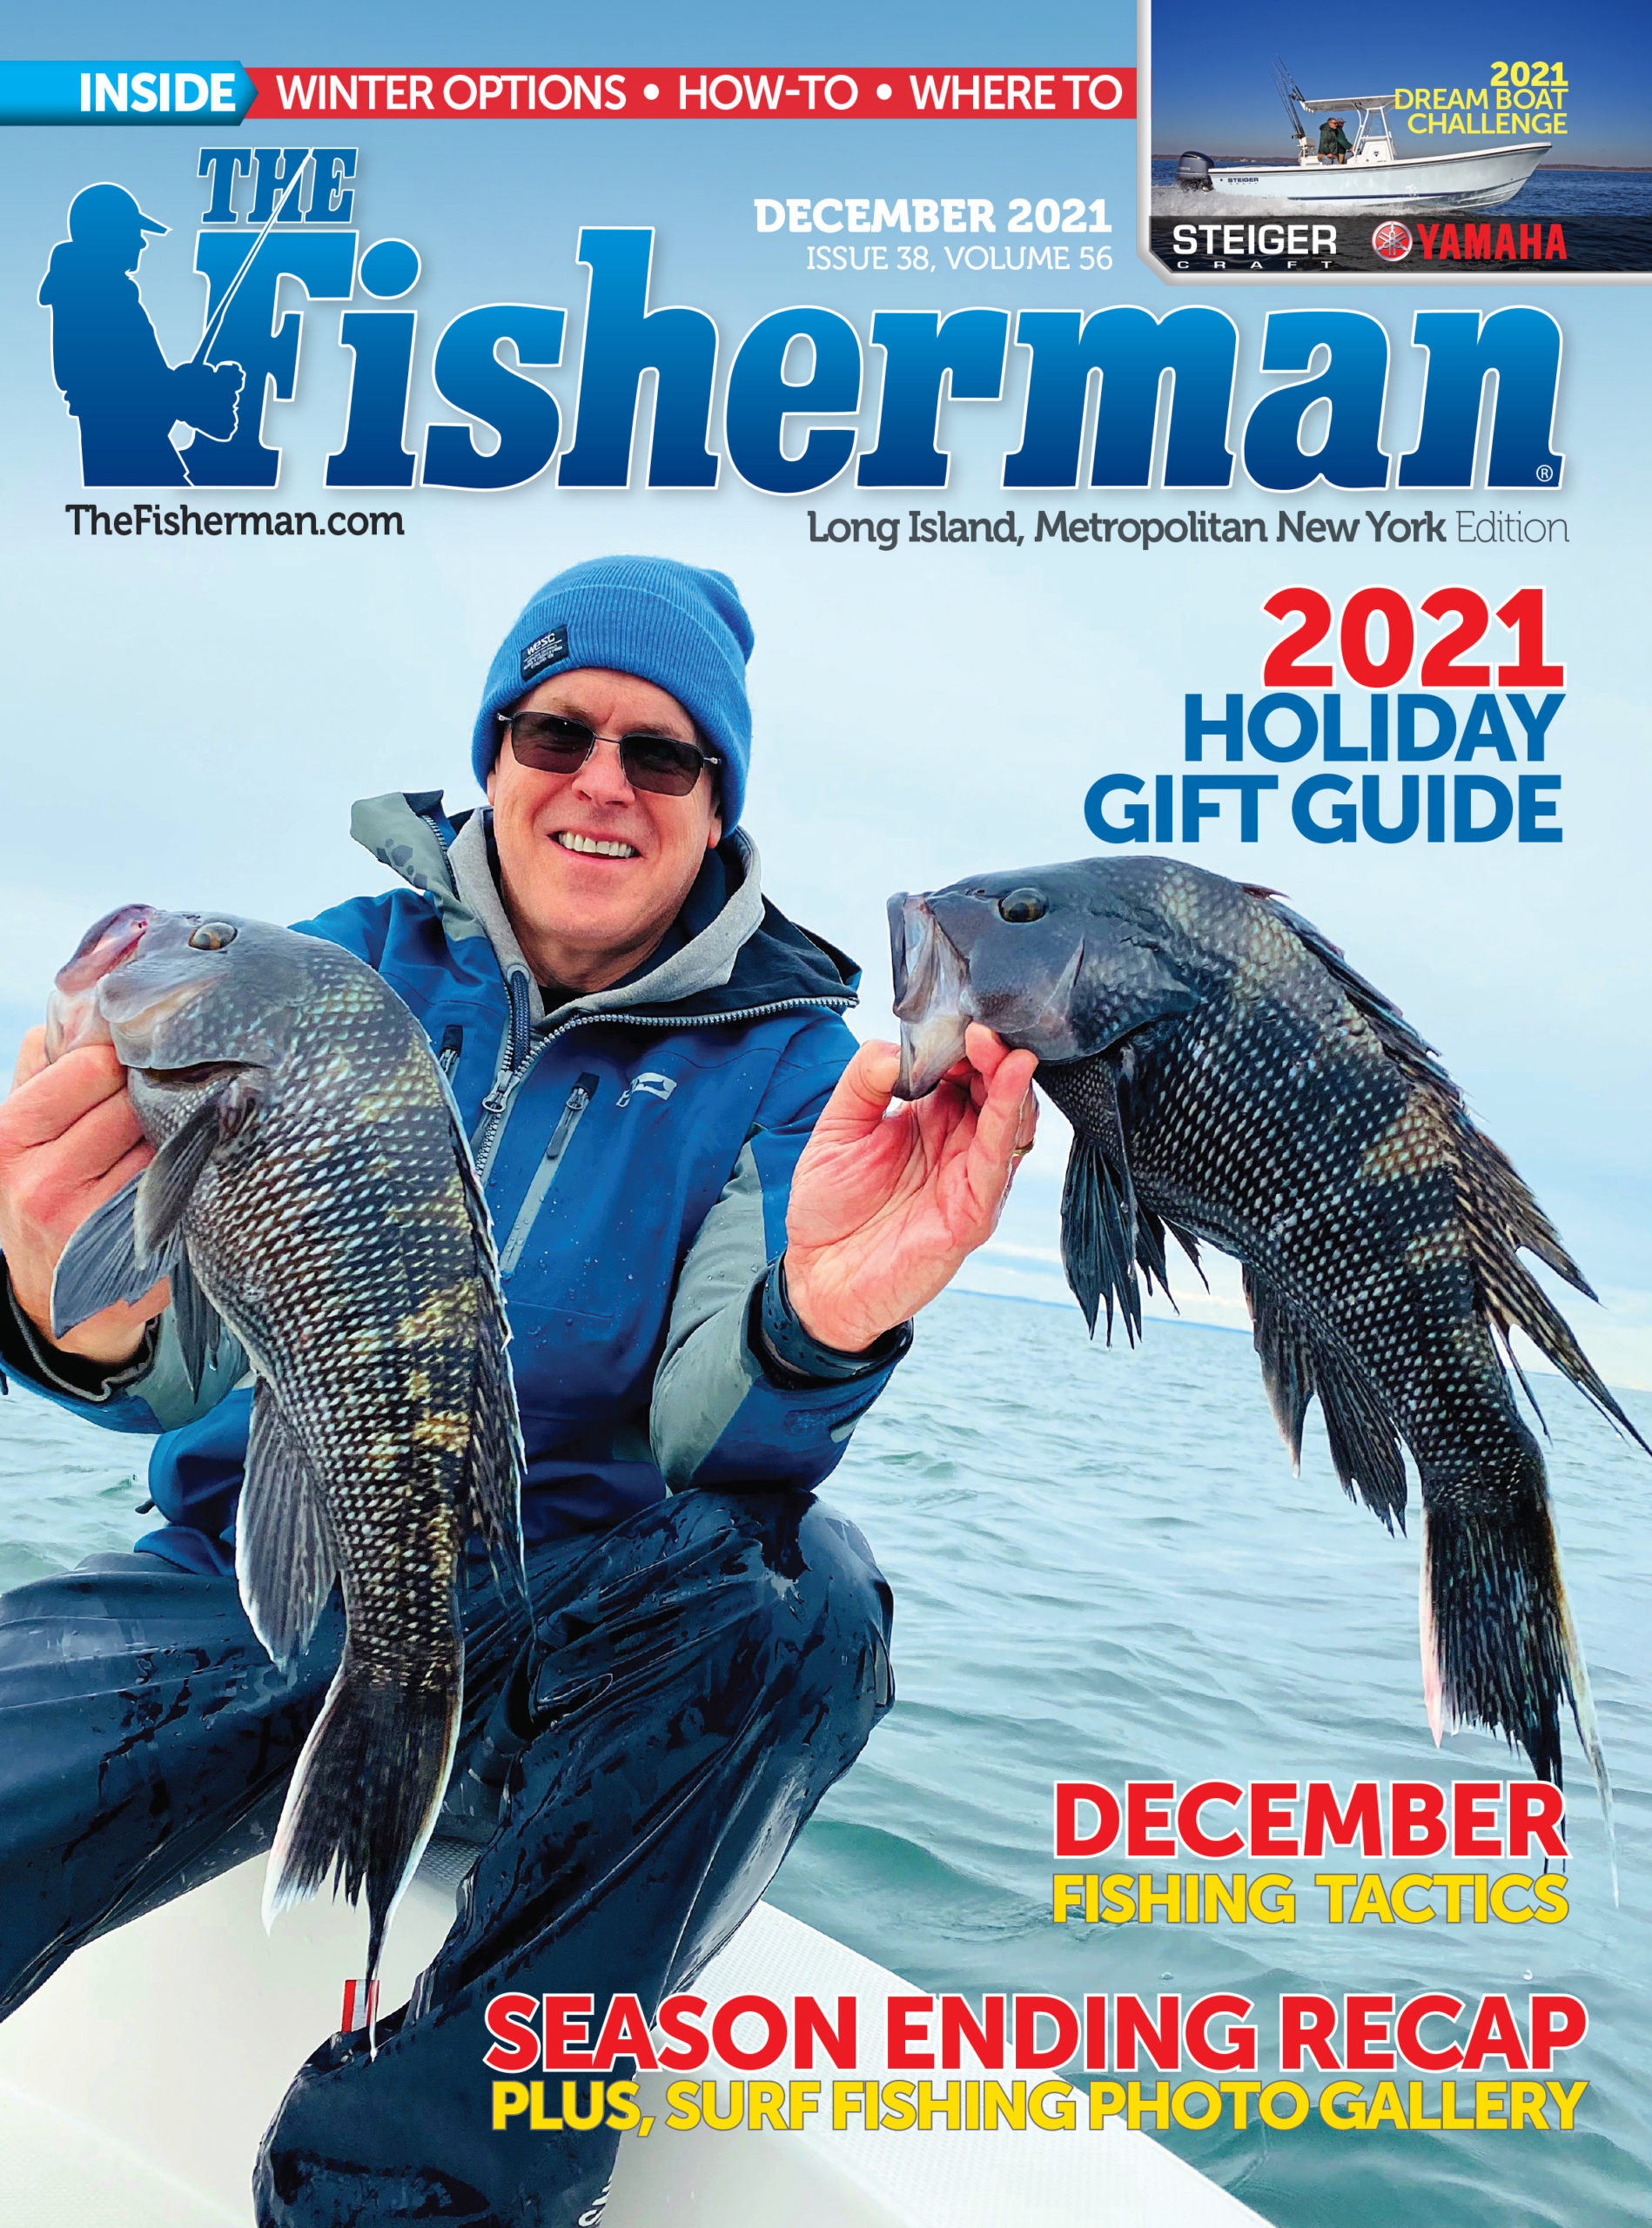 Big Tog Time! Prepping For Winter Jumbos - The Fisherman